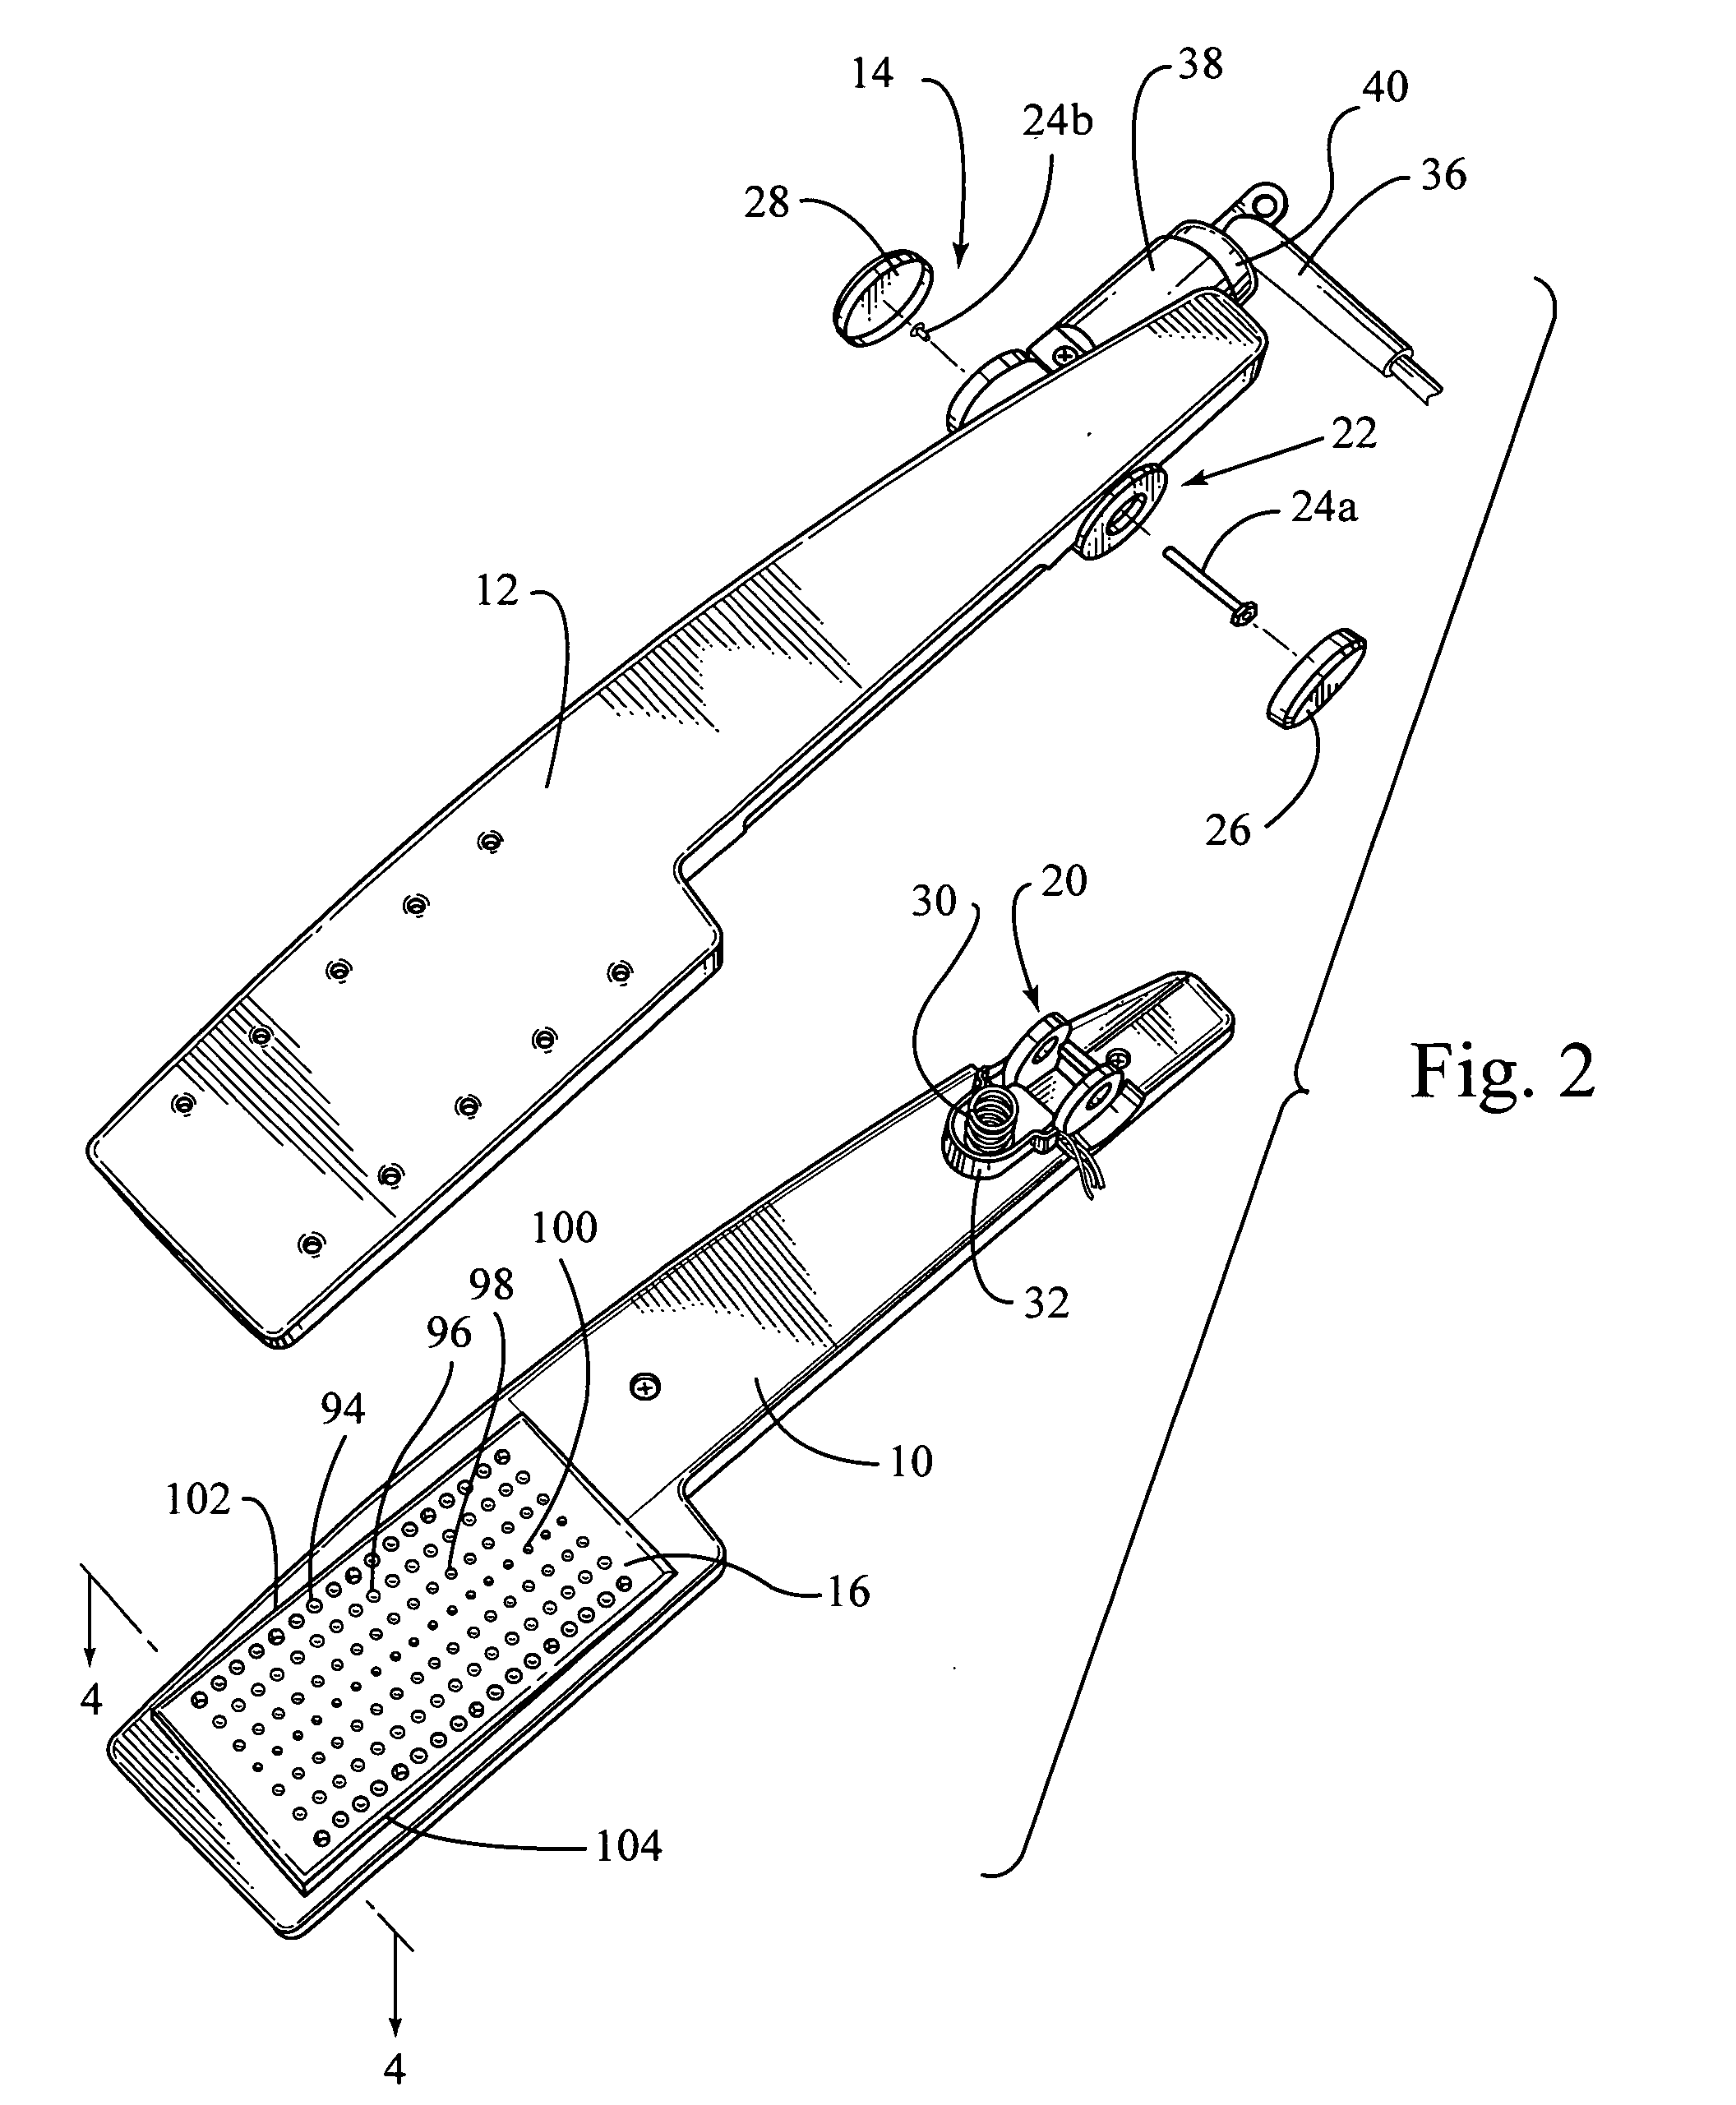 Hair iron with dimpled face plates and method of use in styling hair